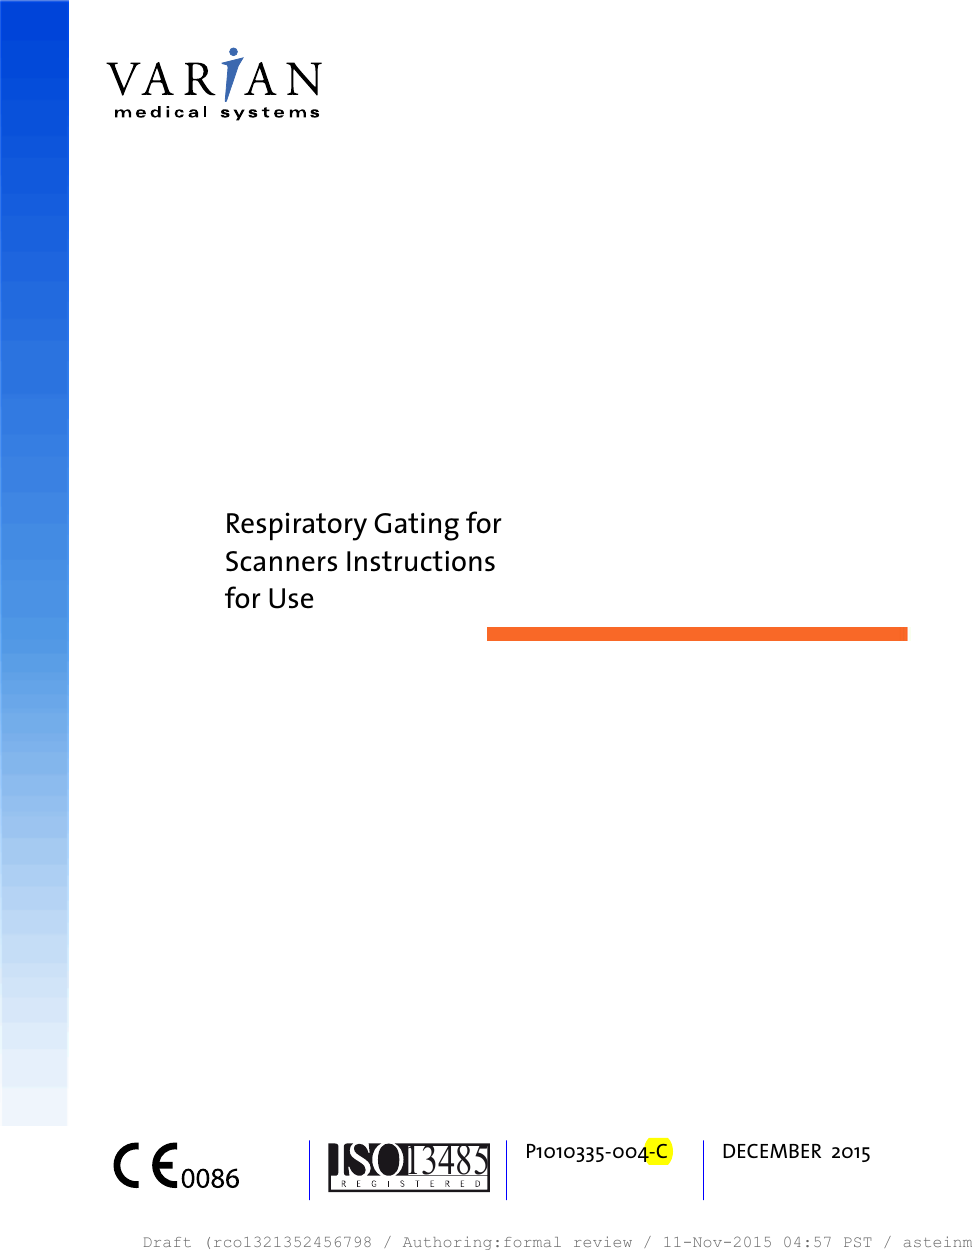 Respiratory Gating forScanners Instructionsfor Use13485P1010335-004-C DECEMBER  2015Draft (rco1321352456798 / Authoring:formal review / 11-Nov-2015 04:57 PST / asteinma)